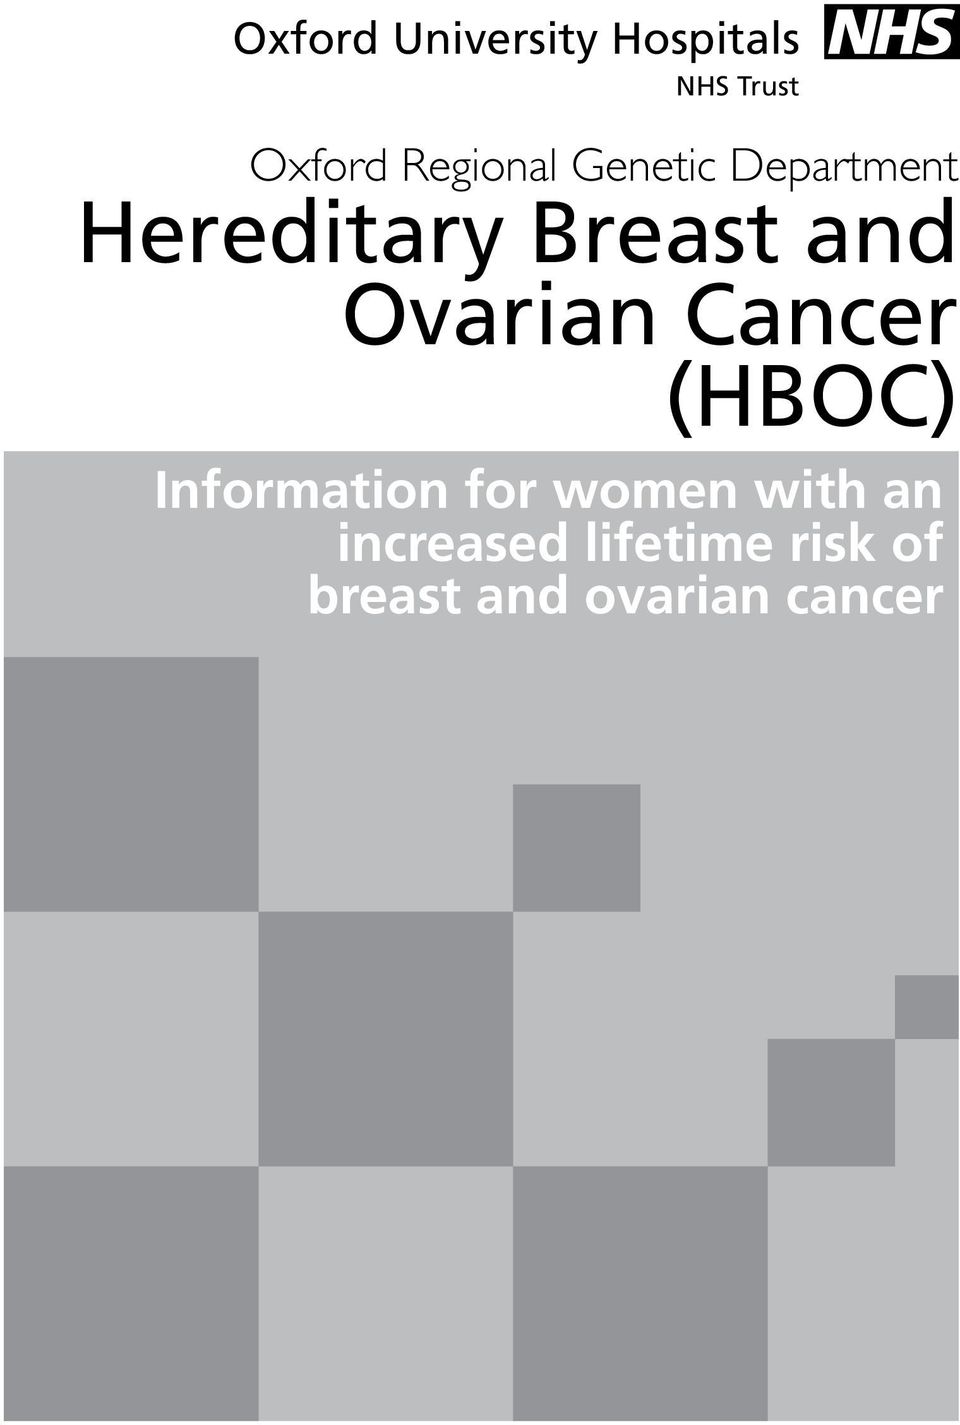 Ovarian Cancer (HBOC) Information for women with